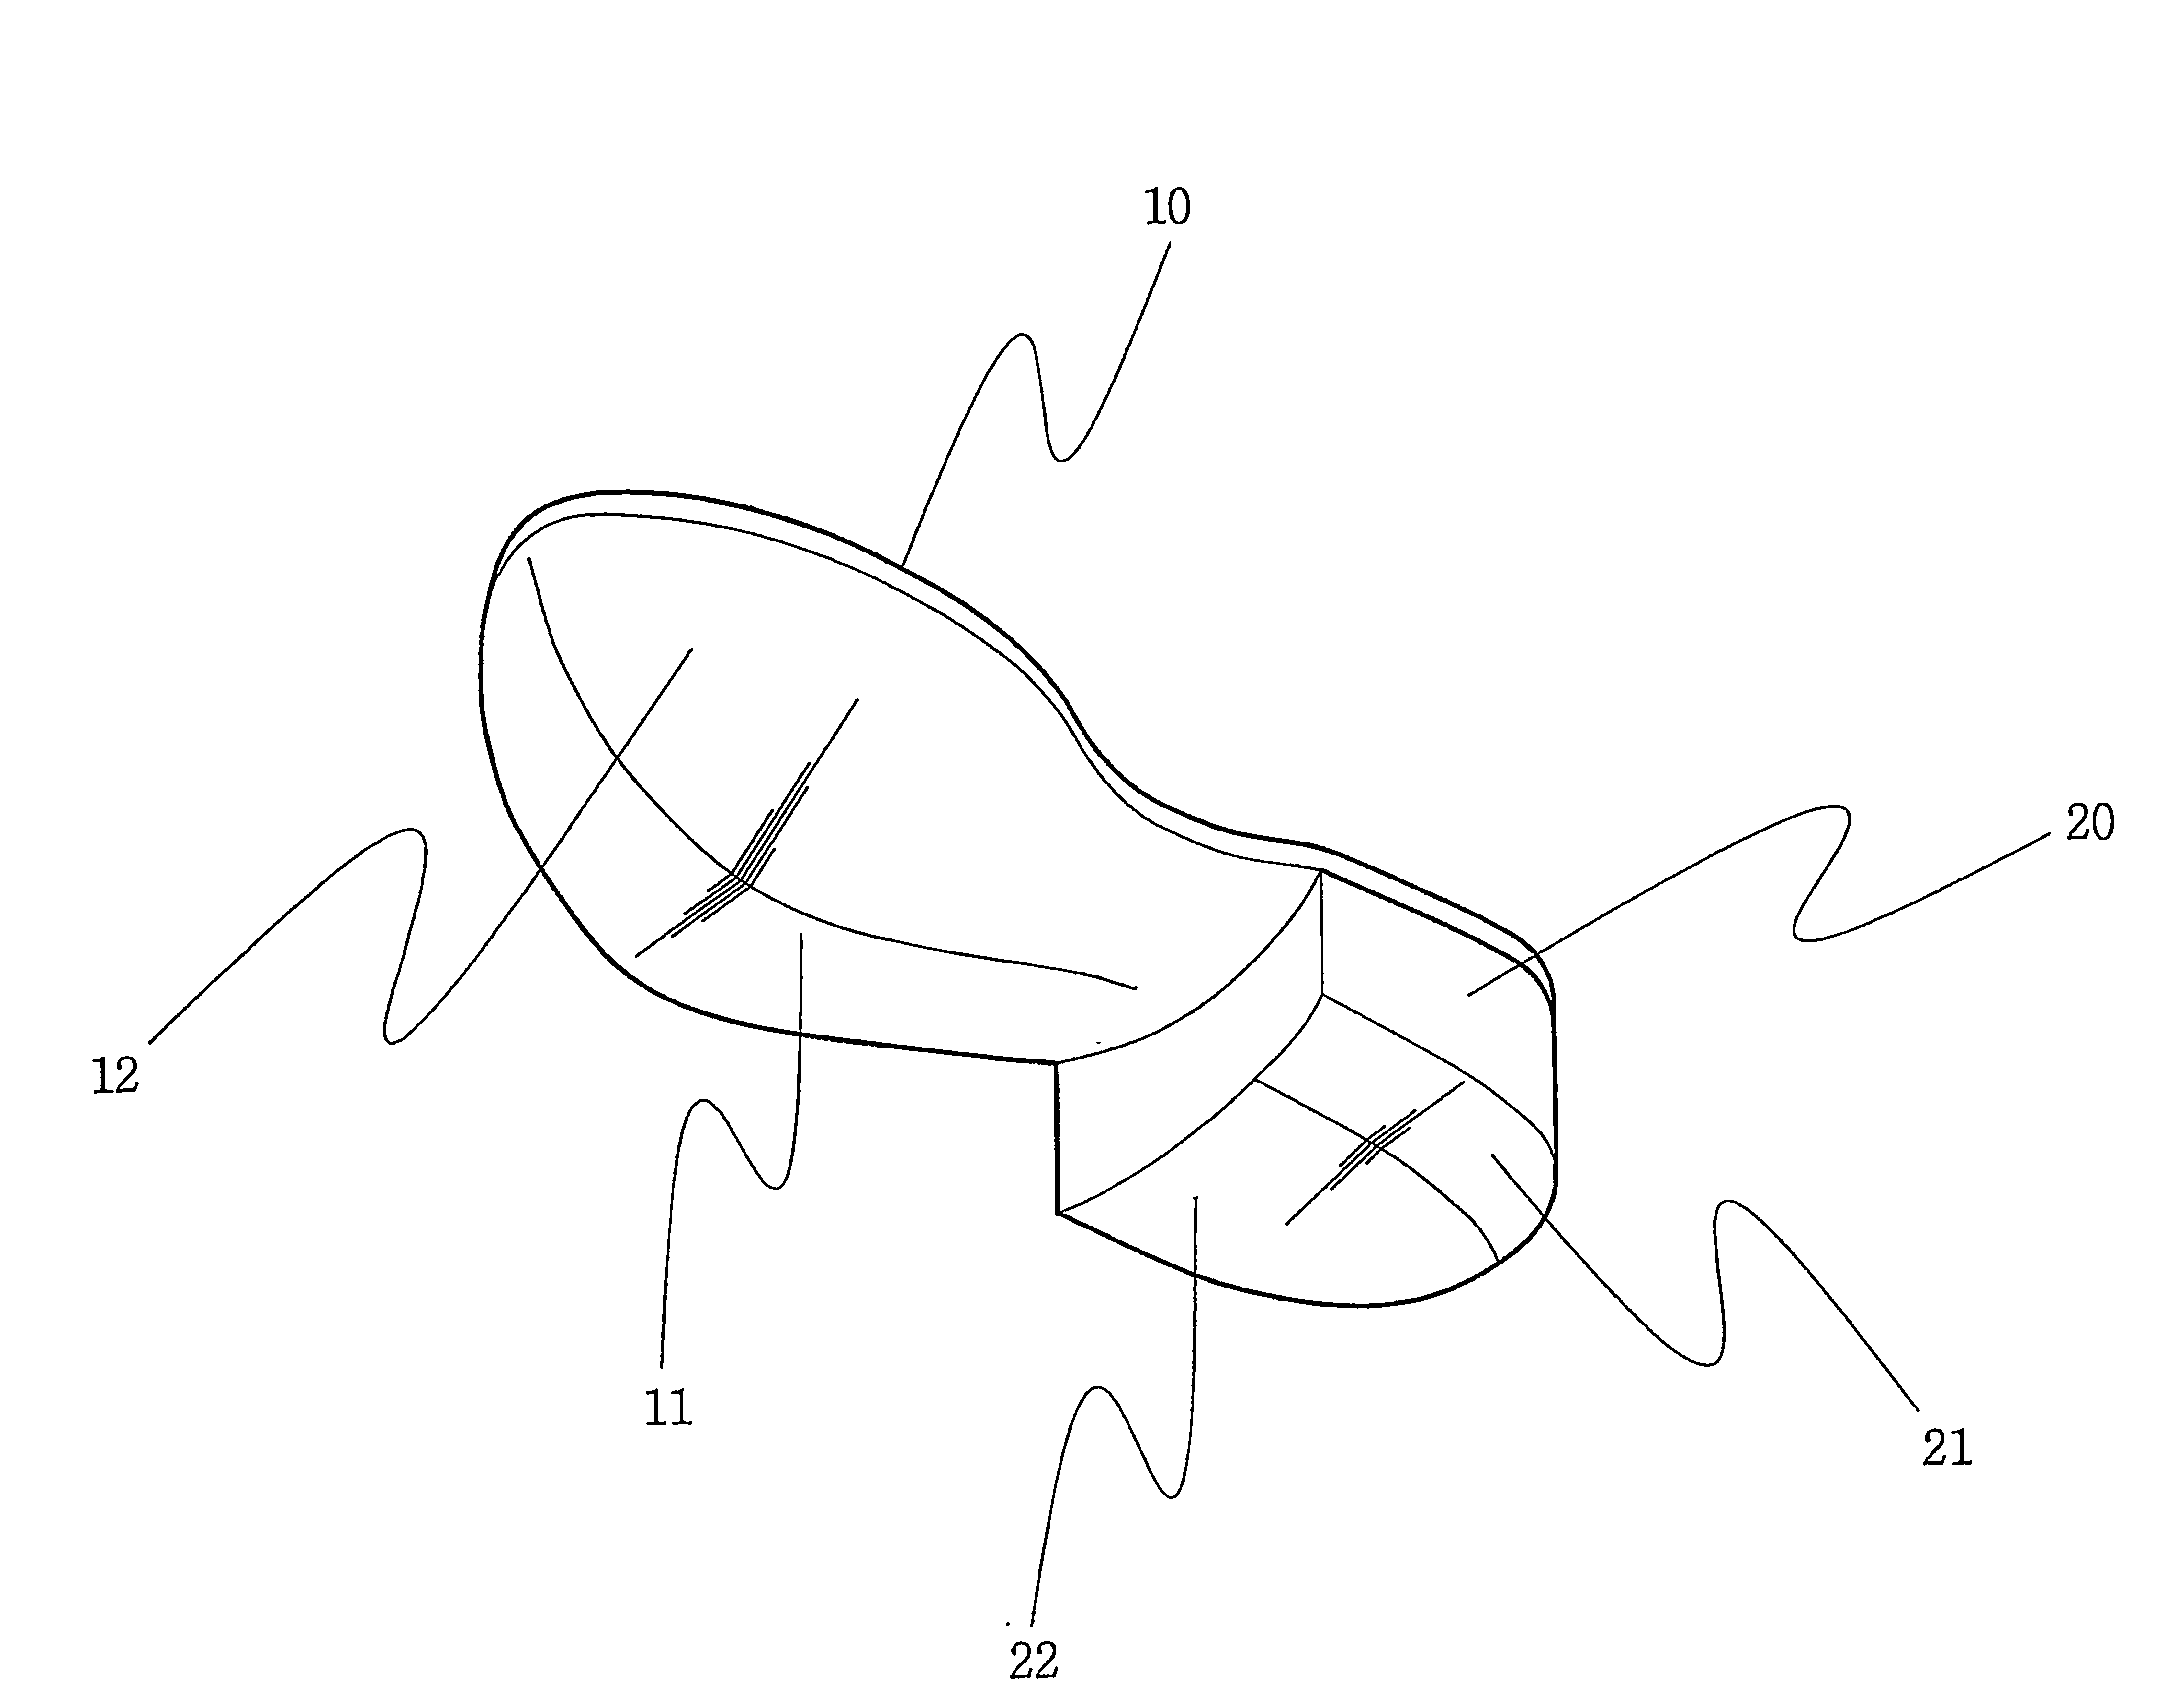 Sole of ergonomic shoe suiting human foot structure and walking